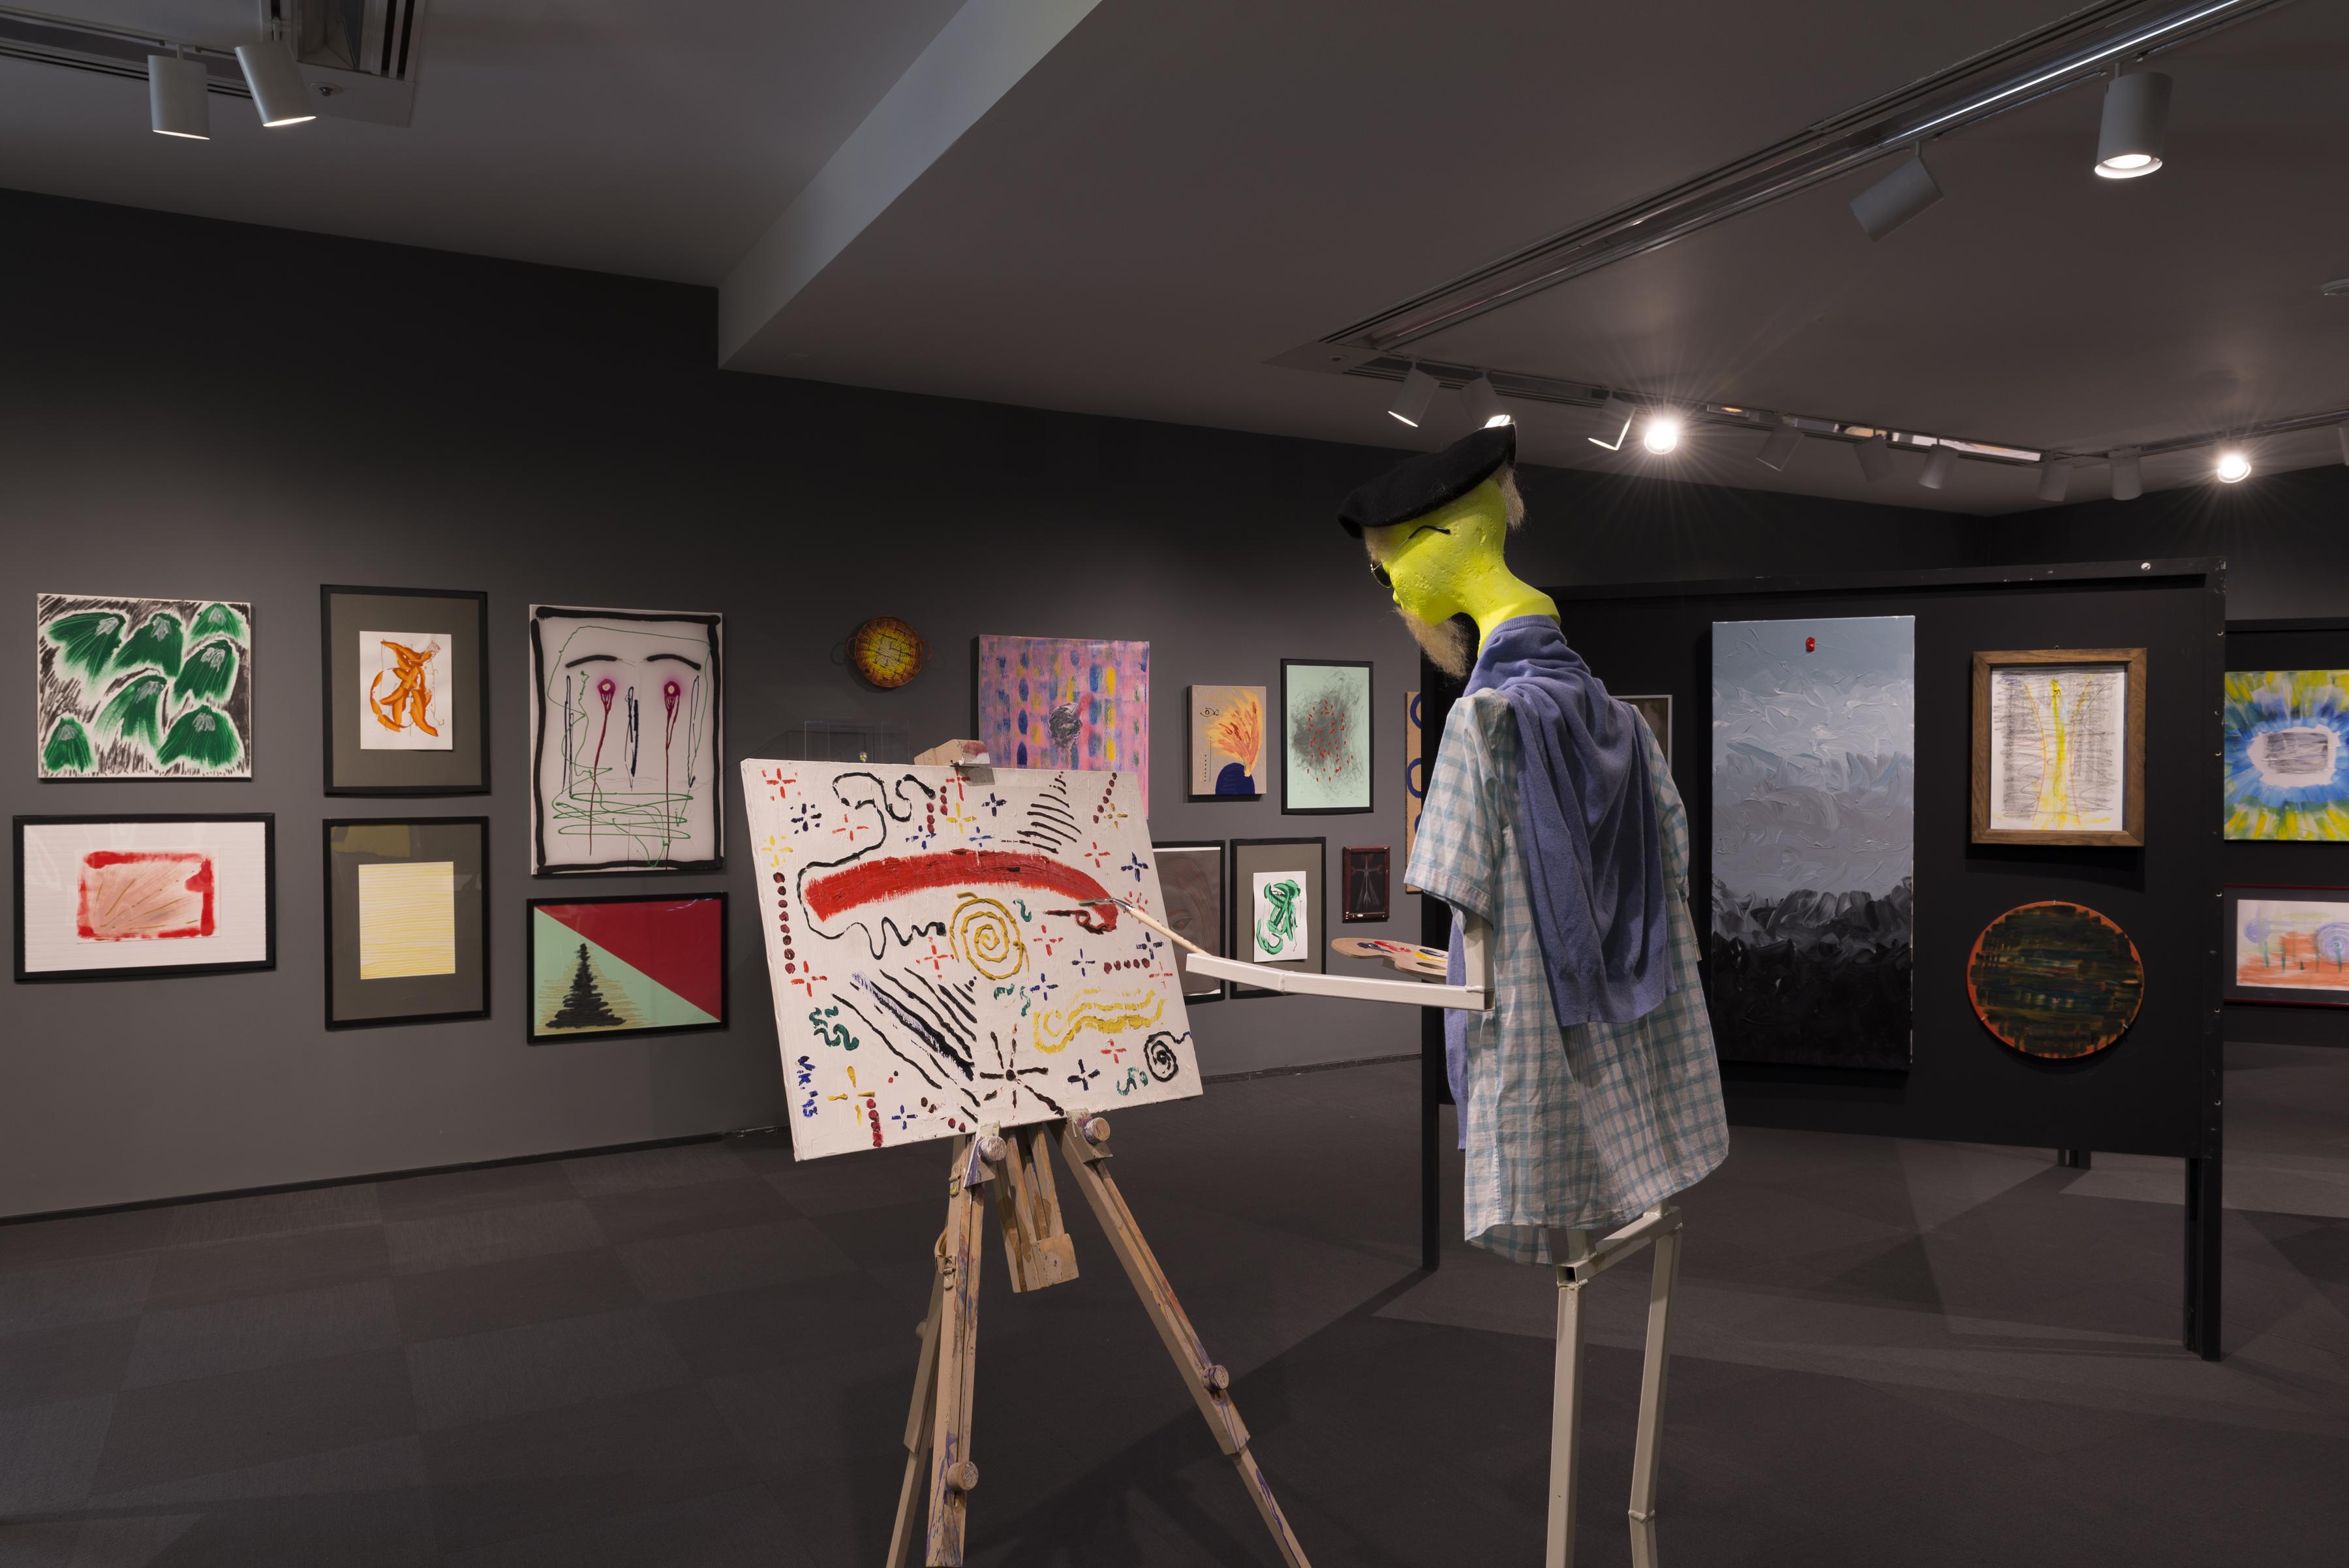 In this photograph, a humanoid sculpture with a yellow head wears a plaid shirt and paints a canvas on an easel in the middle of gallery densely hung with paintings.